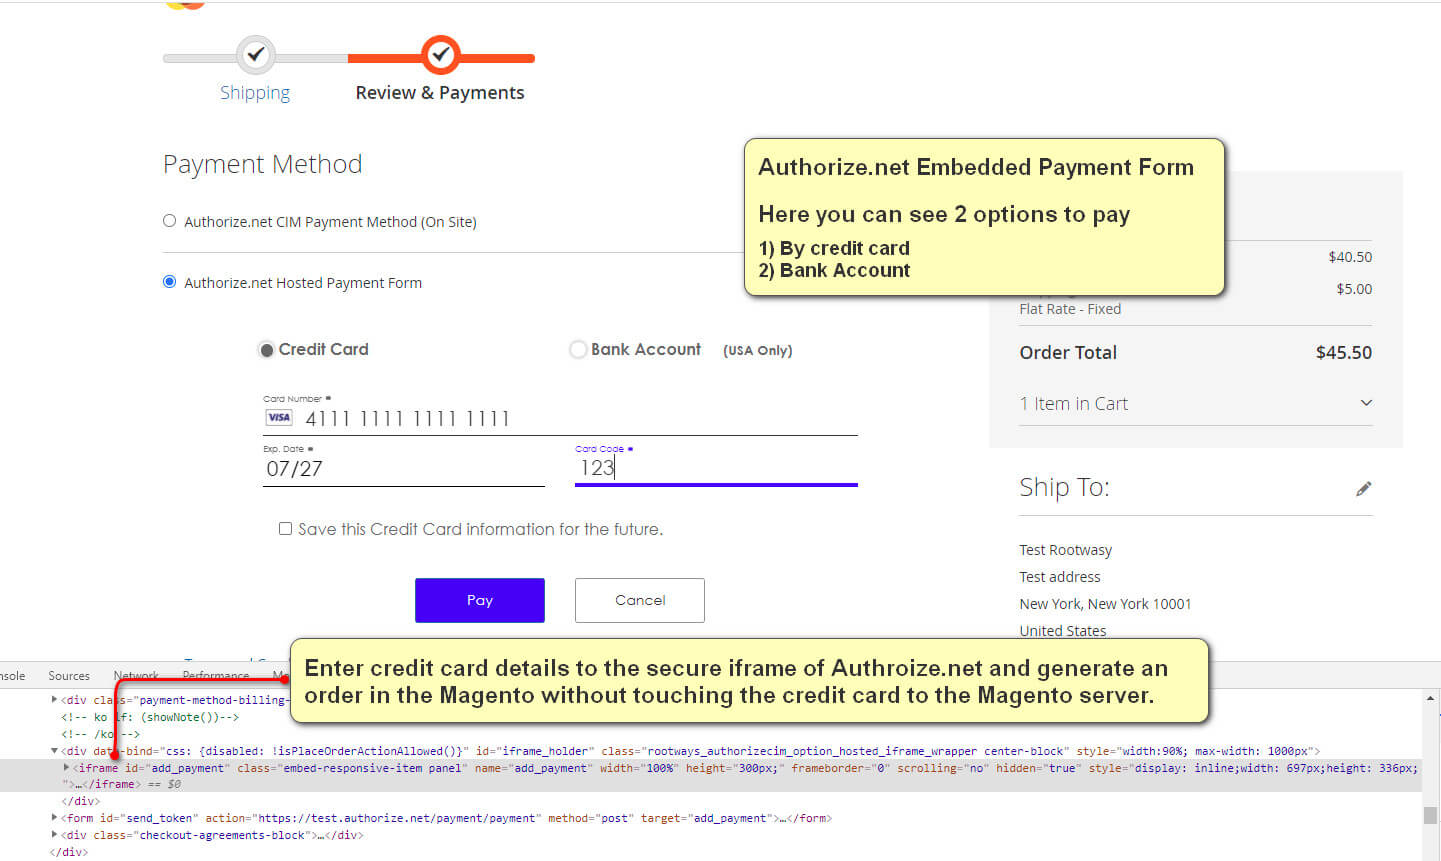 Magento 2 Authorize.net Embedded Payment Form